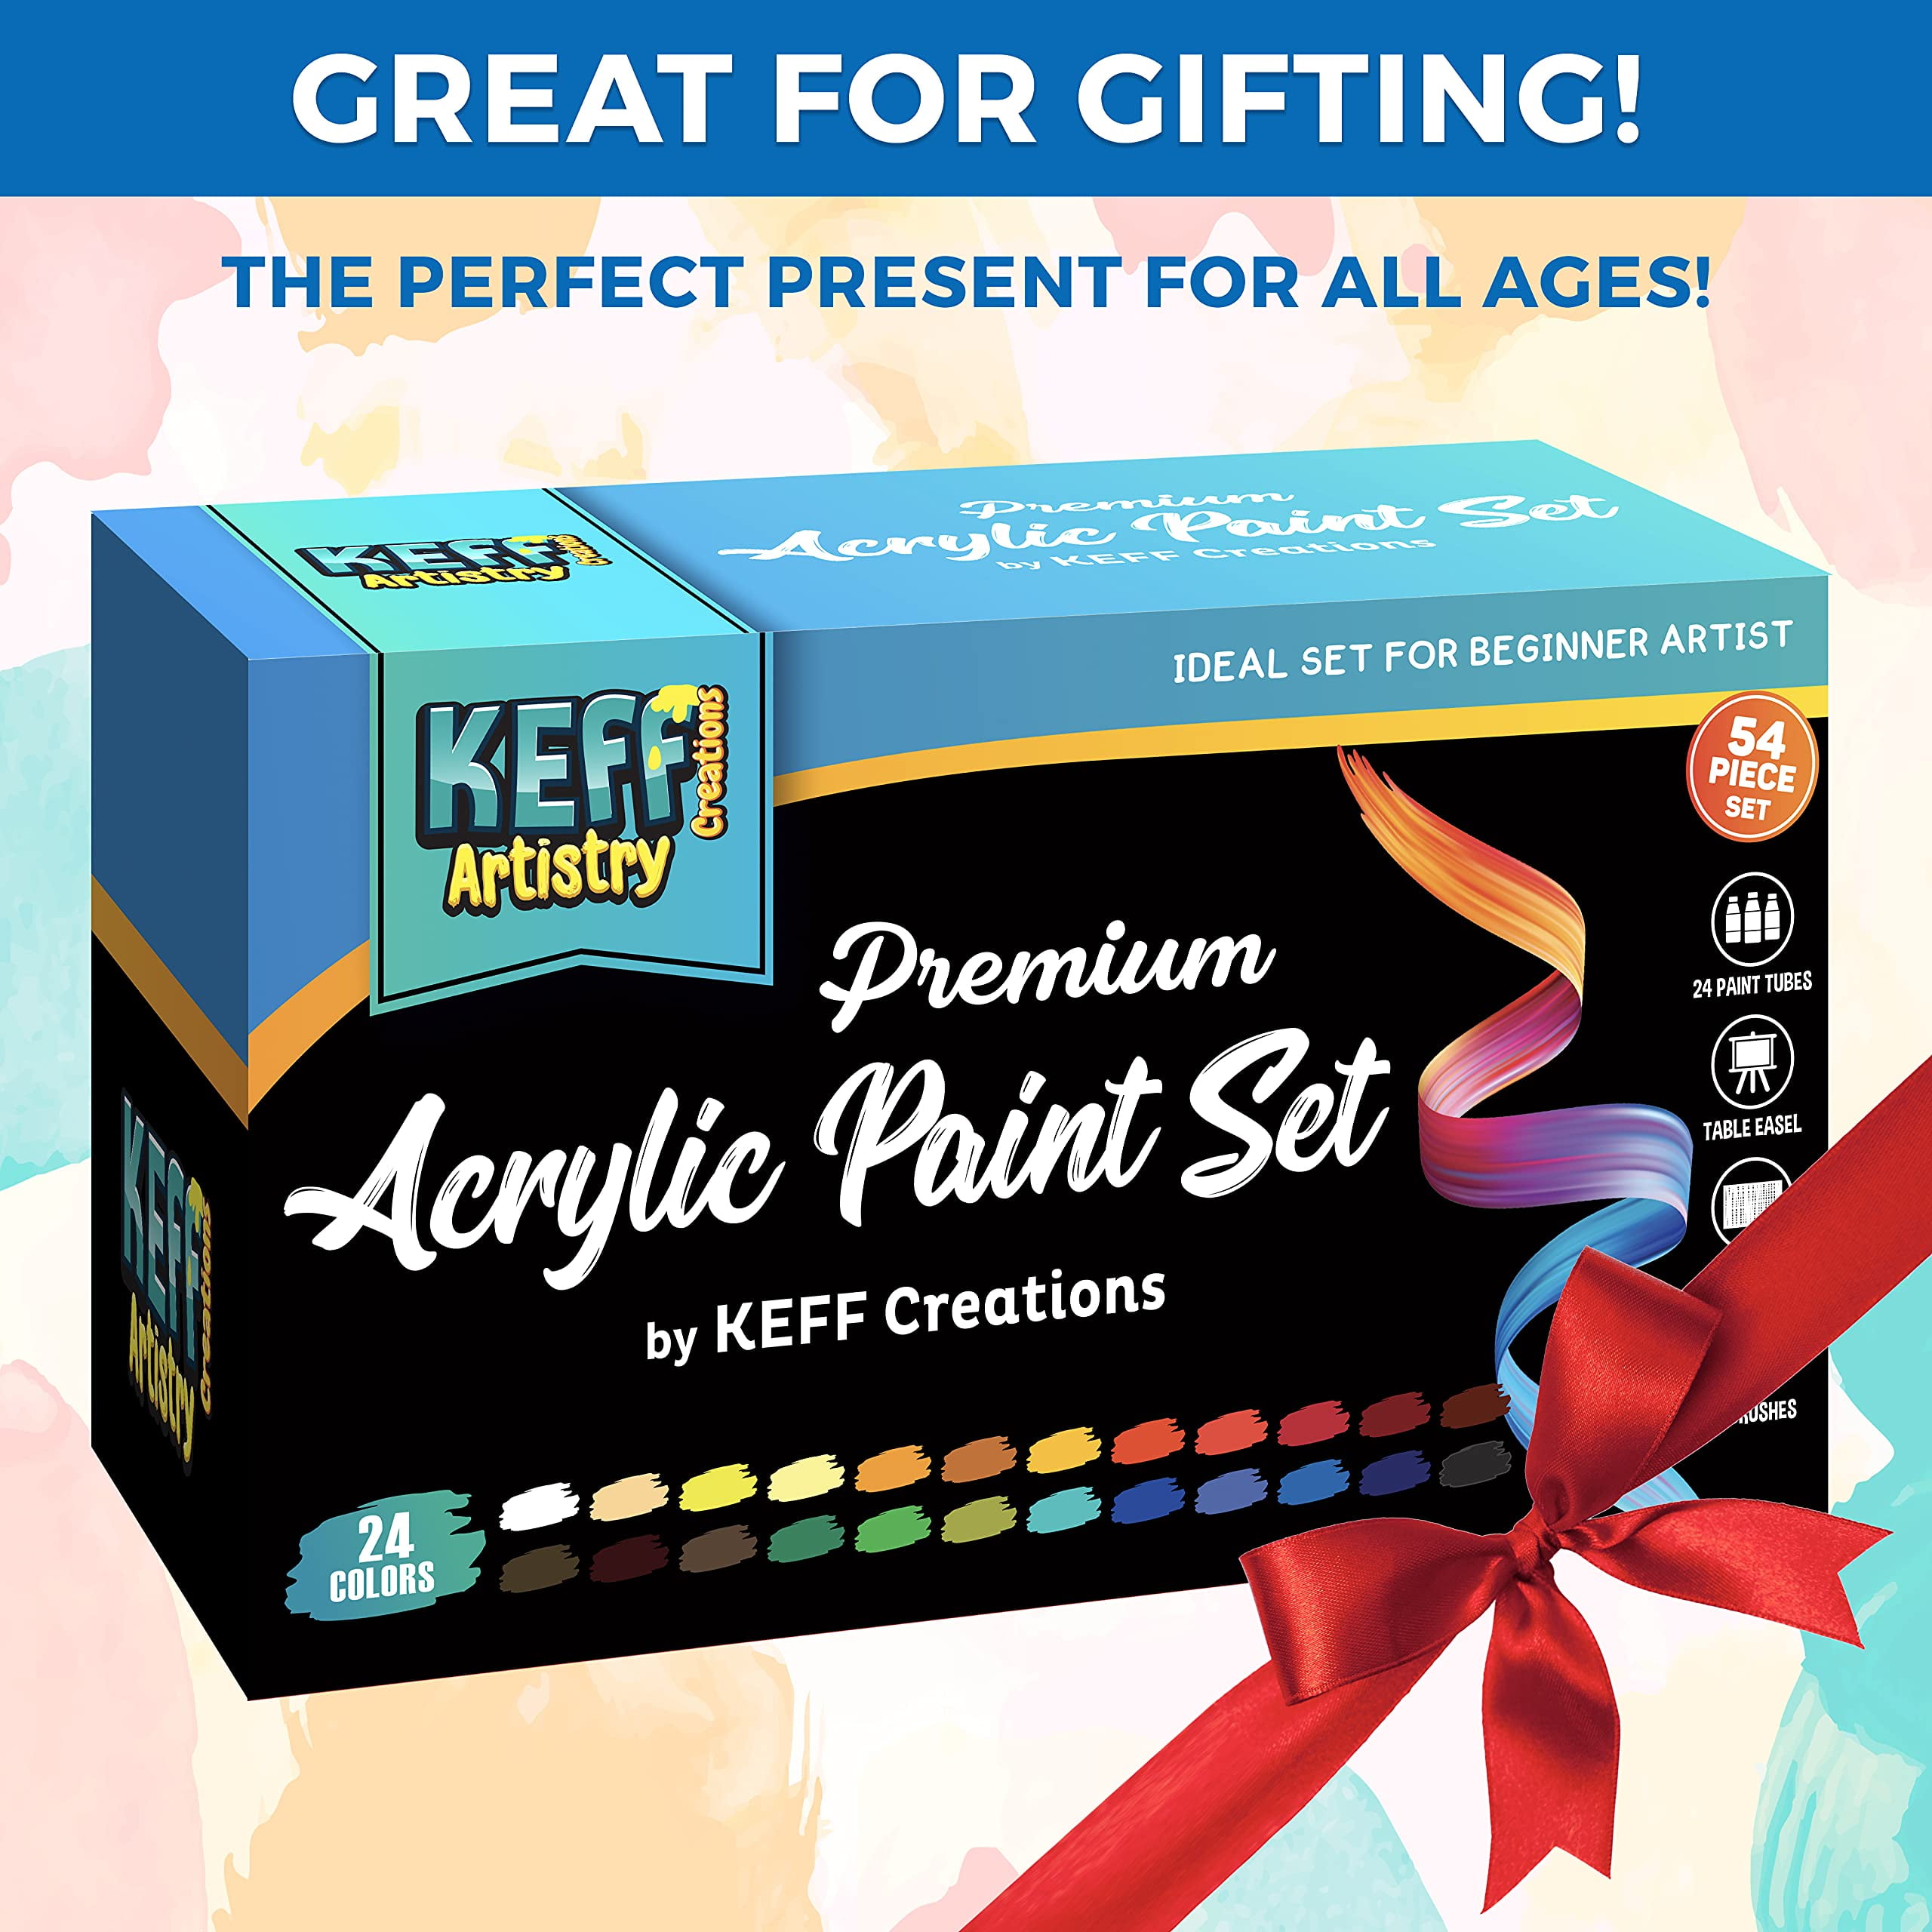 KEFF Creations Acrylic Paint Set - 54 Piece Professional Artist Painting  Supplies Kit, Art Painting, 24 Acrylic Paint Tubes, Paintbrushes, Canvases  and More-for Adults & Beginners 